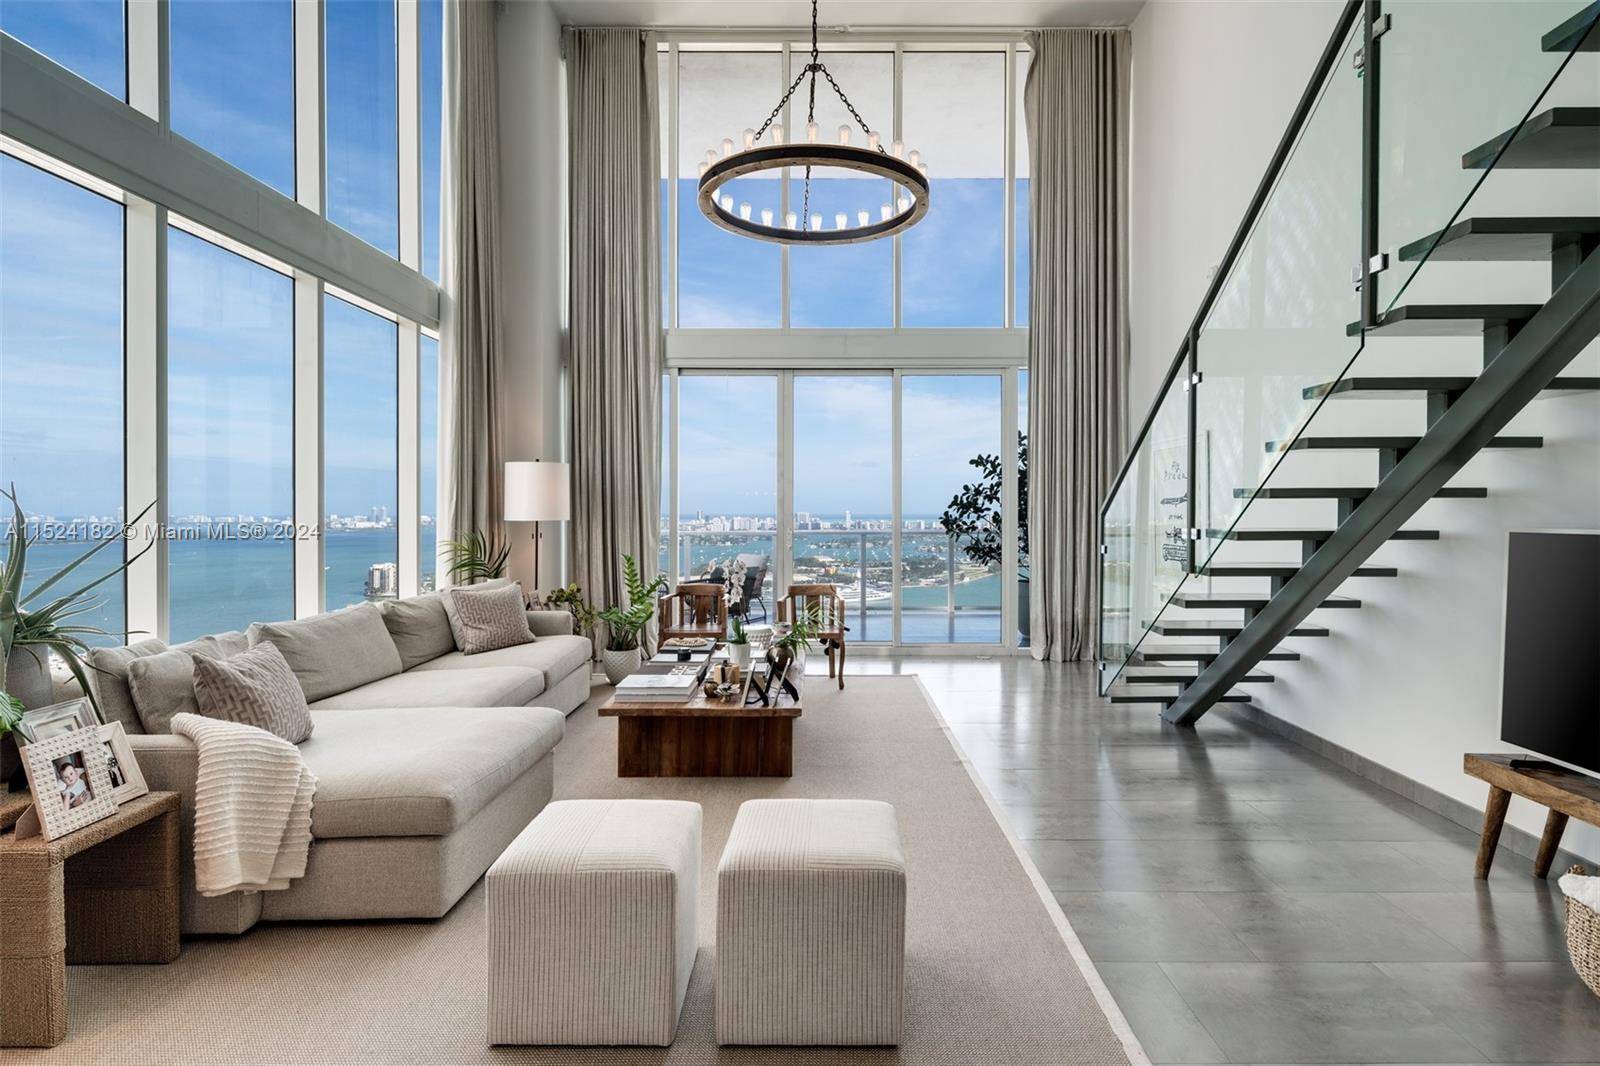 Experience luxury living at its finest in this exquisite corner unit loft at Ten Museum Miami, offering unparalleled views of the bay.